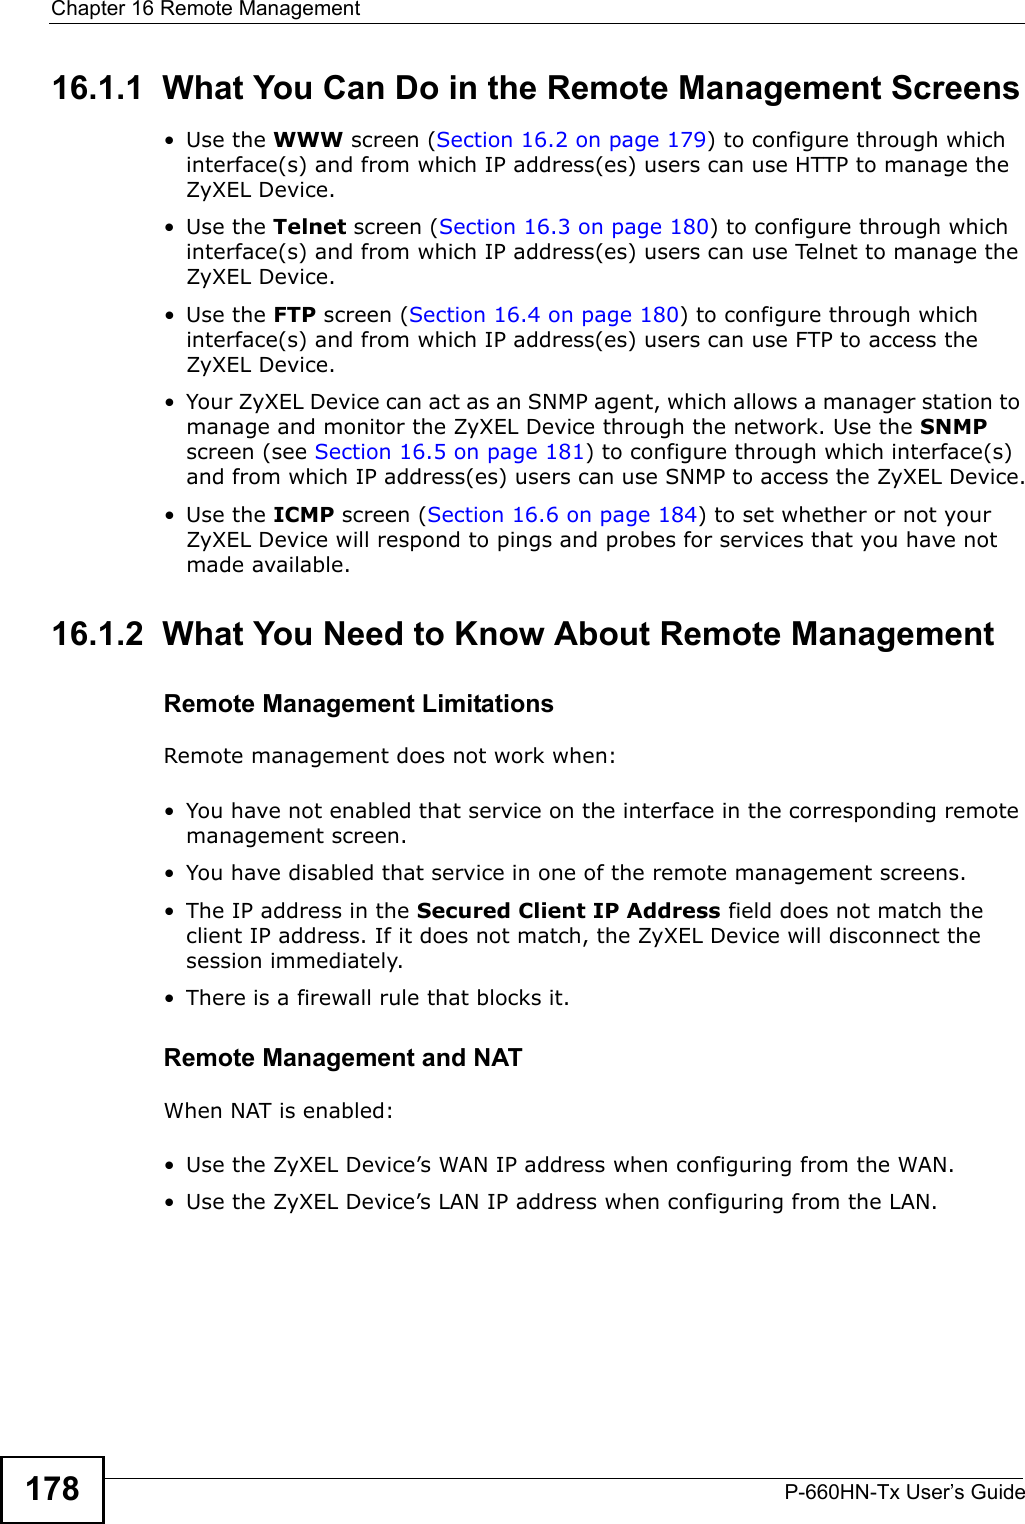 Chapter 16 Remote ManagementP-660HN-Tx User’s Guide17816.1.1  What You Can Do in the Remote Management Screens•Use the WWW screen (Section 16.2 on page 179) to configure through which interface(s) and from which IP address(es) users can use HTTP to manage the ZyXEL Device.•Use the Telnet screen (Section 16.3 on page 180) to configure through which interface(s) and from which IP address(es) users can use Telnet to manage the ZyXEL Device.•Use the FTP screen (Section 16.4 on page 180) to configure through which interface(s) and from which IP address(es) users can use FTP to access the ZyXEL Device.• Your ZyXEL Device can act as an SNMP agent, which allows a manager station to manage and monitor the ZyXEL Device through the network. Use the SNMP screen (see Section 16.5 on page 181) to configure through which interface(s) and from which IP address(es) users can use SNMP to access the ZyXEL Device.•Use the ICMP screen (Section 16.6 on page 184) to set whether or not your ZyXEL Device will respond to pings and probes for services that you have not made available.16.1.2  What You Need to Know About Remote ManagementRemote Management LimitationsRemote management does not work when:• You have not enabled that service on the interface in the corresponding remote management screen.• You have disabled that service in one of the remote management screens.• The IP address in the Secured Client IP Address field does not match the client IP address. If it does not match, the ZyXEL Device will disconnect the session immediately.• There is a firewall rule that blocks it.Remote Management and NATWhen NAT is enabled:• Use the ZyXEL Device’s WAN IP address when configuring from the WAN. • Use the ZyXEL Device’s LAN IP address when configuring from the LAN.